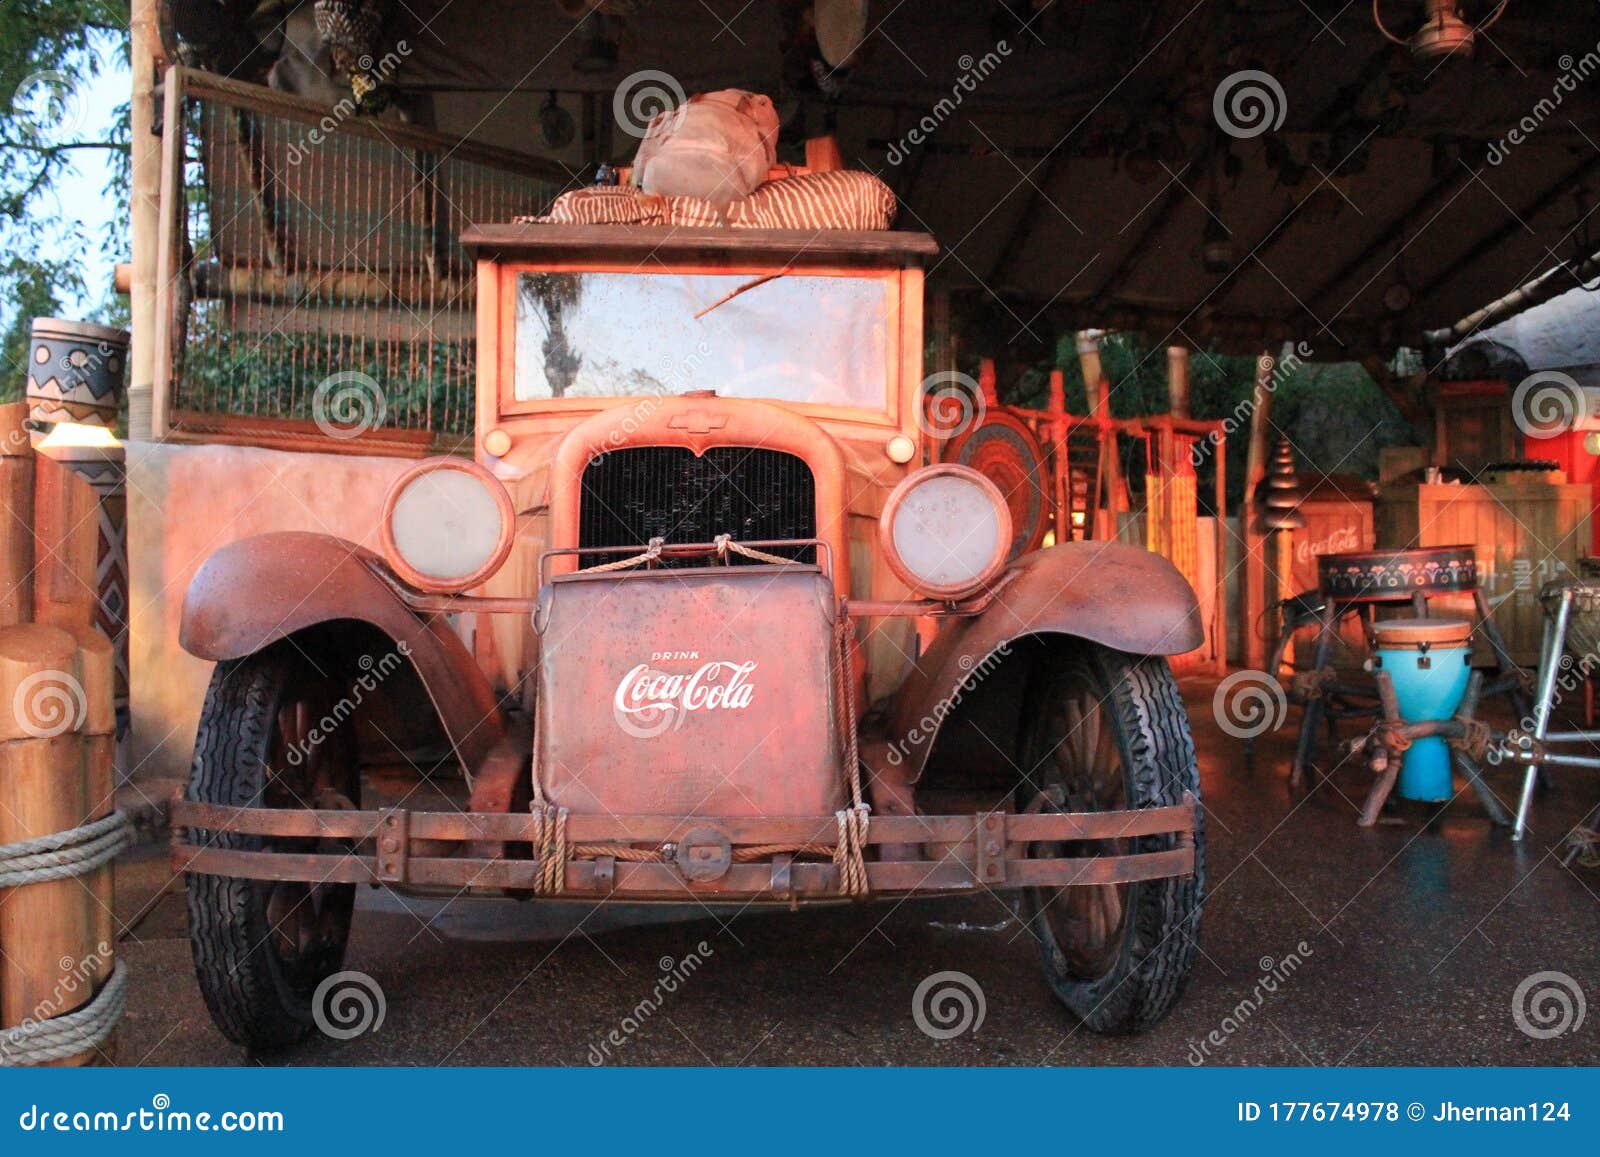 OLD ANTIQUE VINTAGE Coca Cola Delivery Truck Sales Advertising RARE PIC Photo 